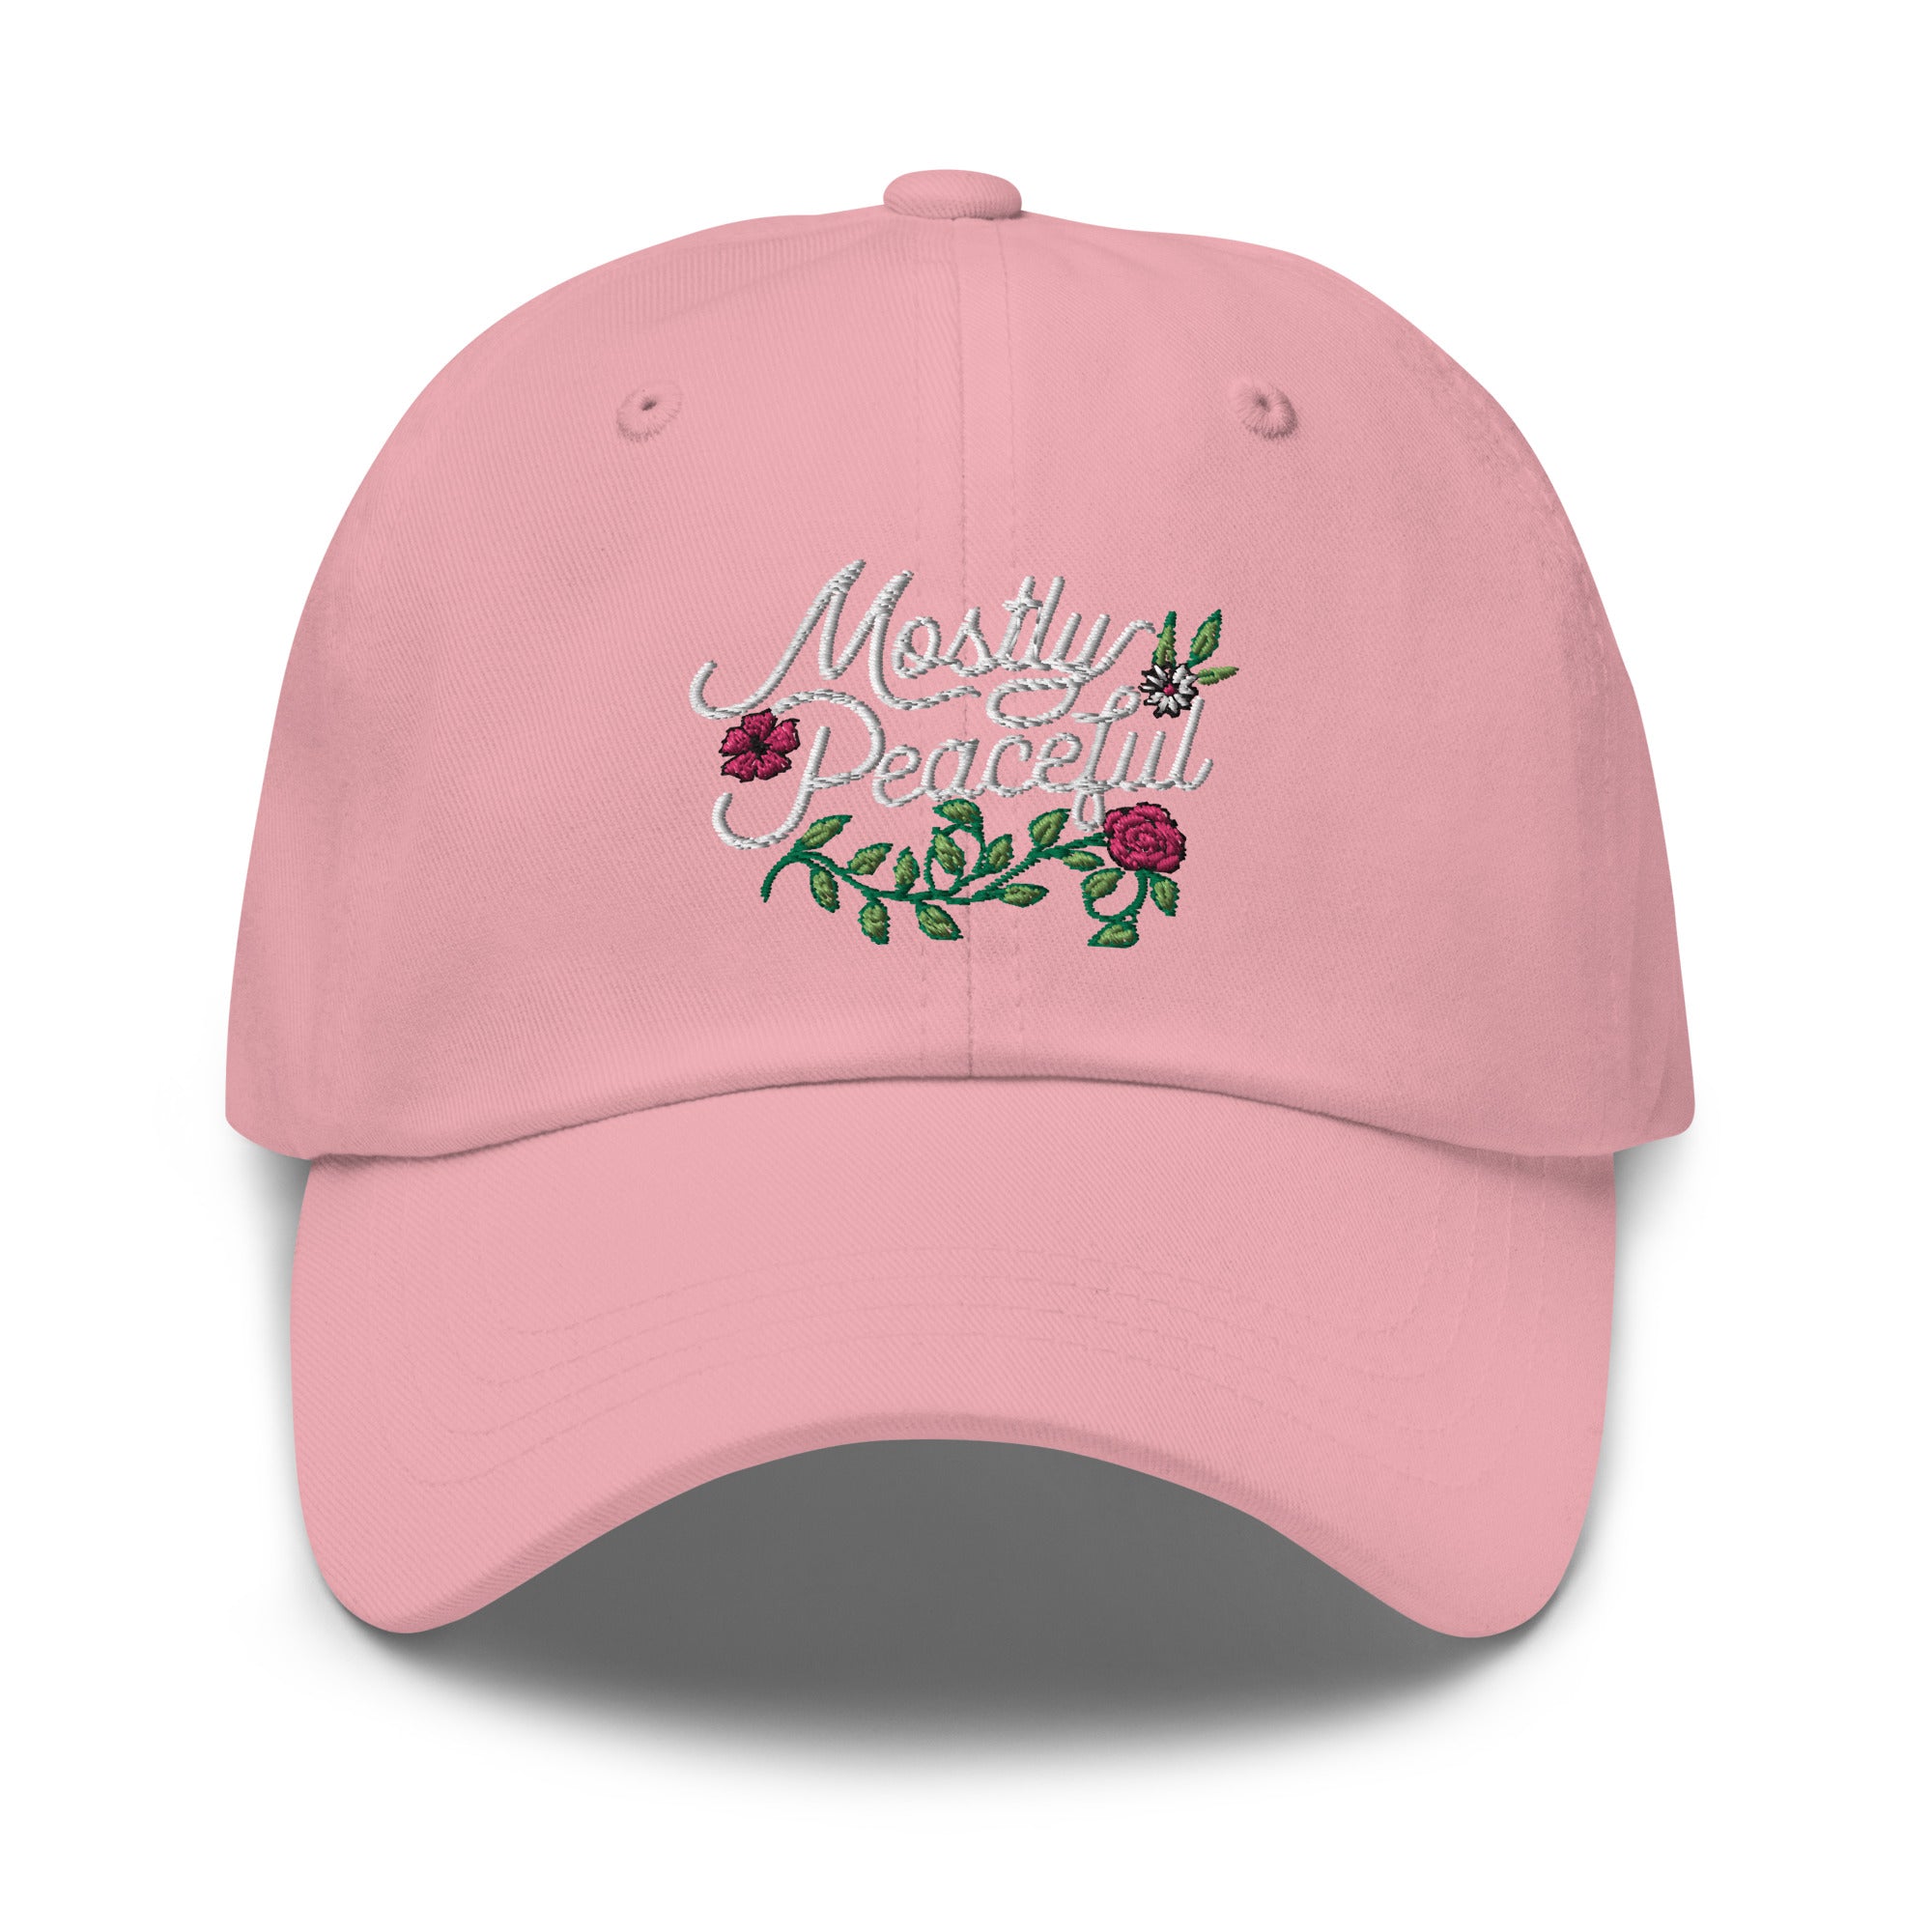 Mostly Peaceful Hat